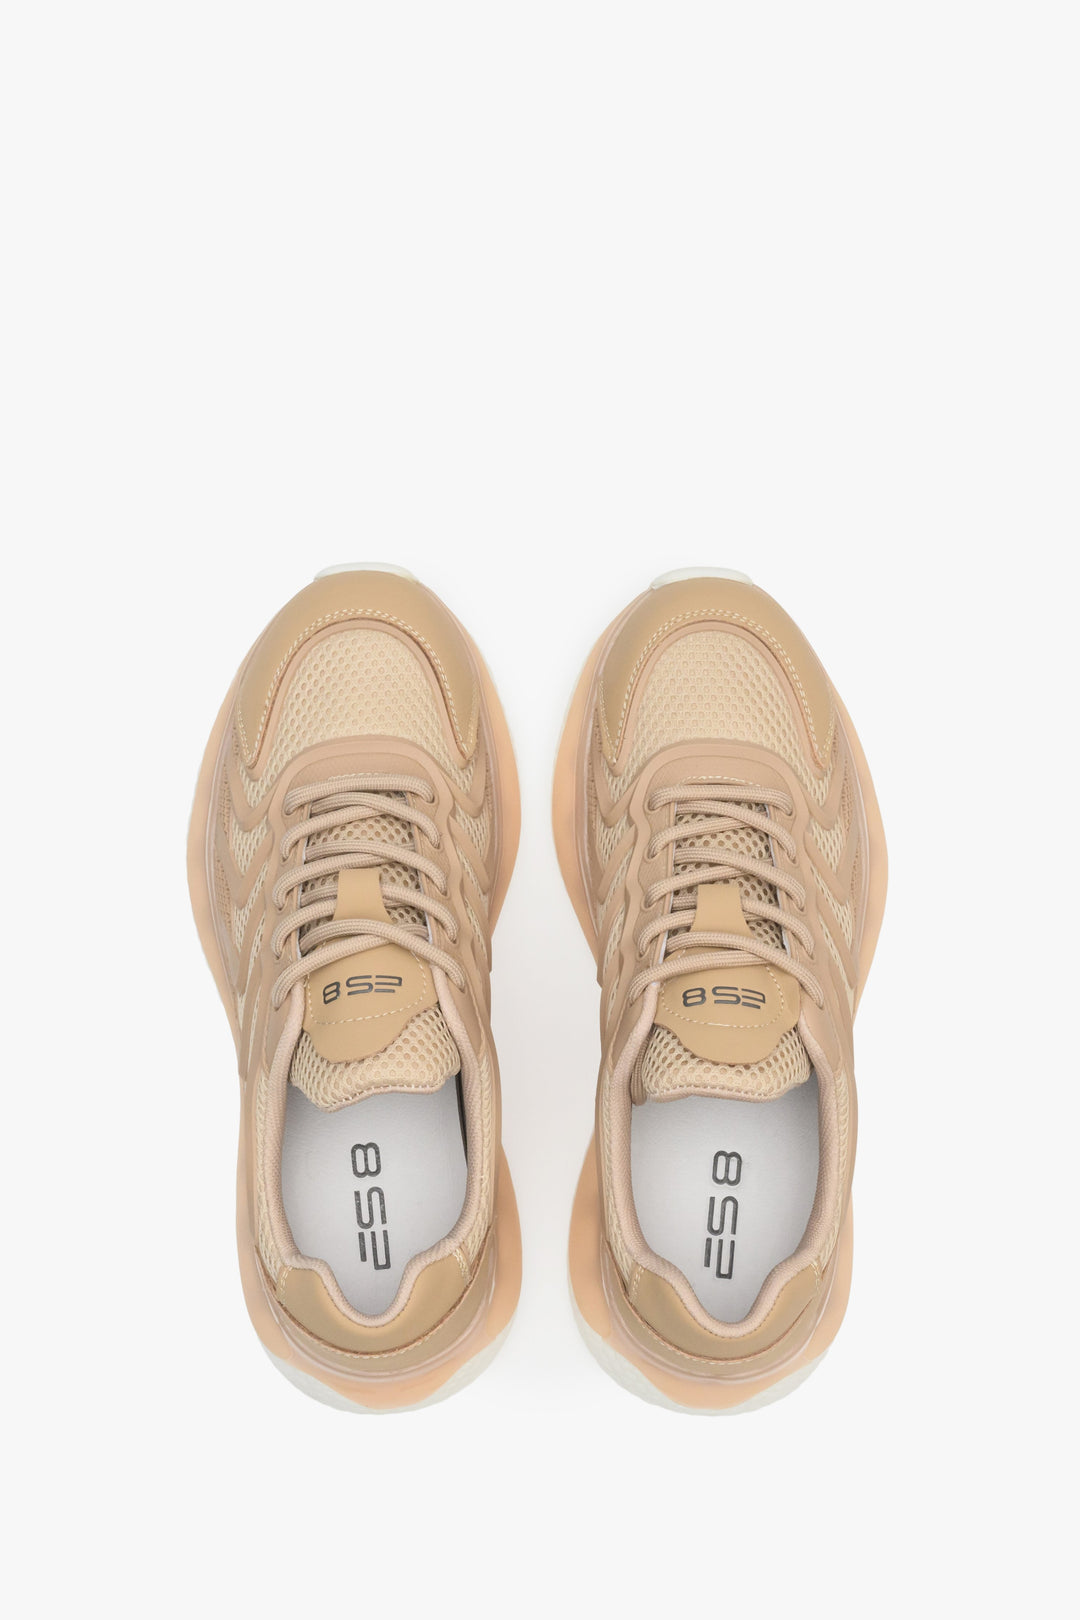 Women's beige sneakers with mesh, versatile for all seasons - presentation of the footwear from above.